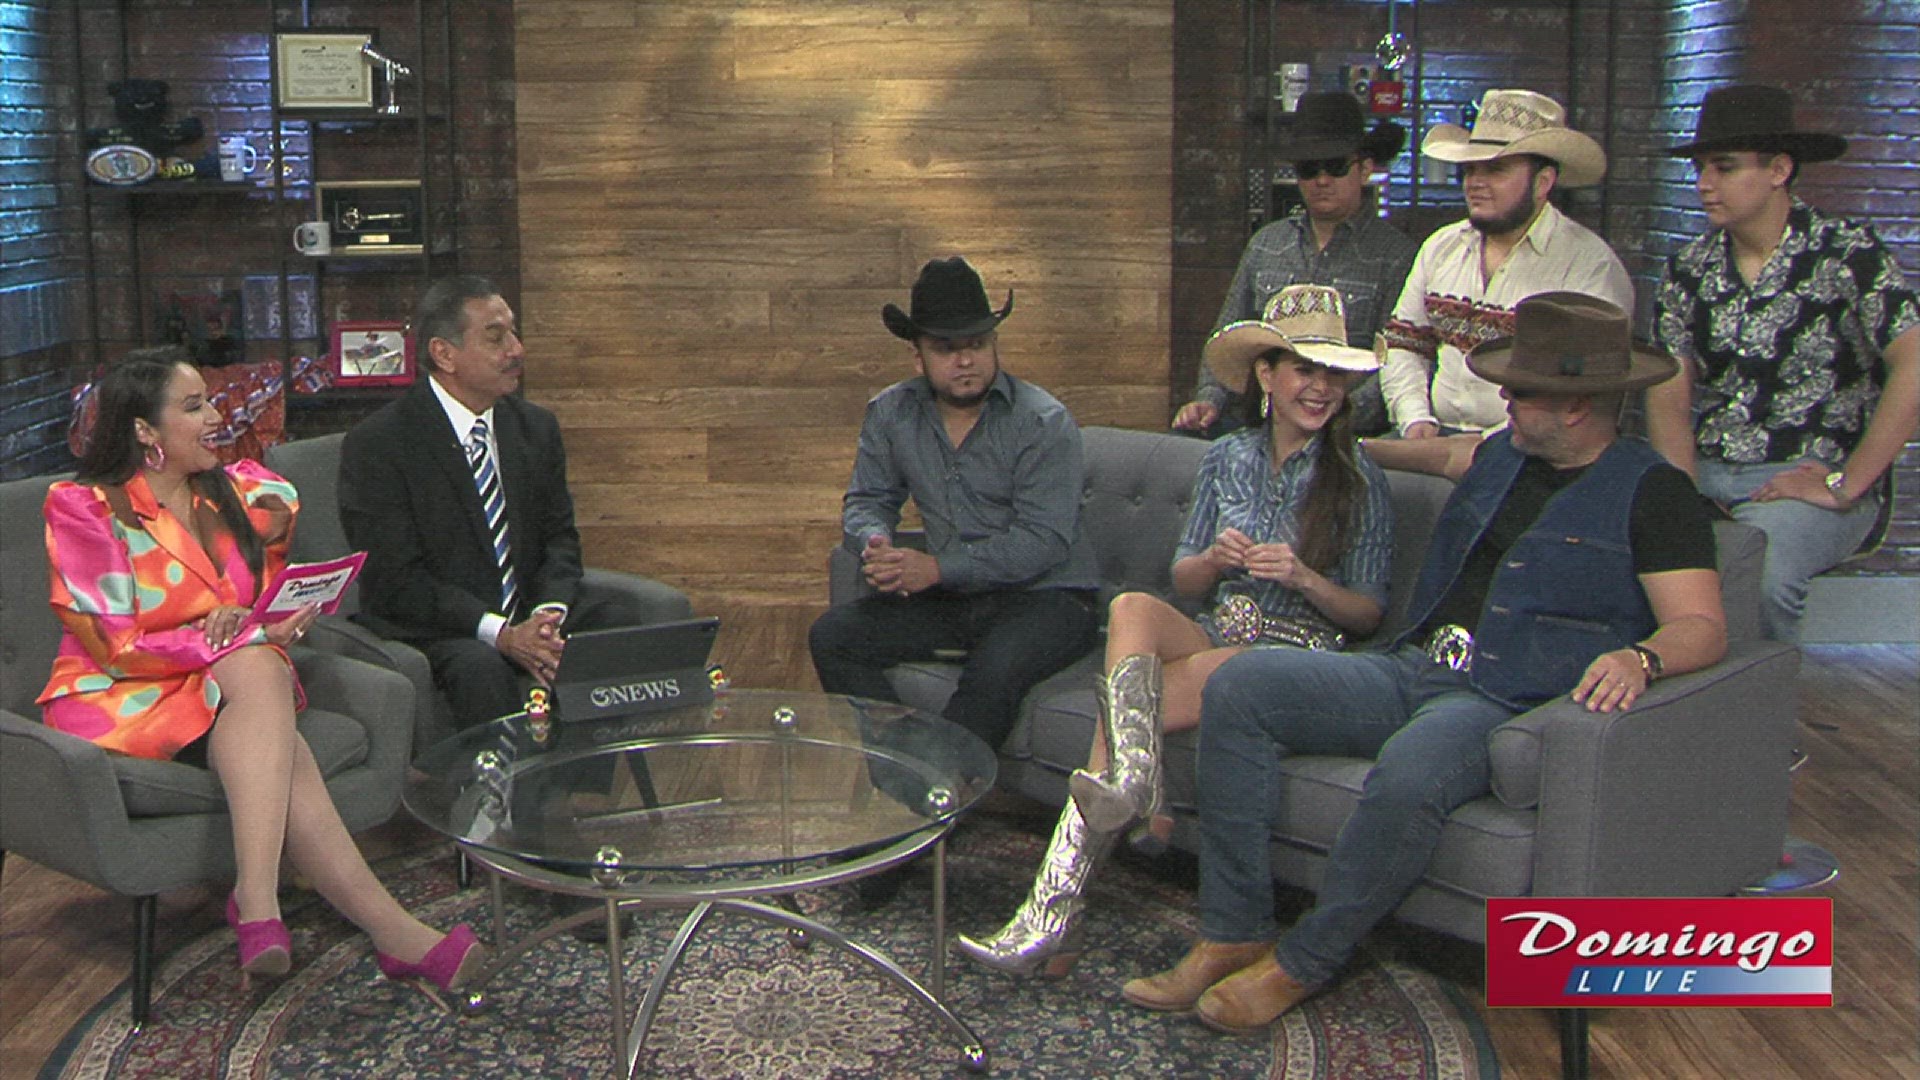 Laura Denisse y Los Brillantes joined us n Domingo Live to discuss their Monterrey roots, love for Tejano music and hope of reaching new American audiences.